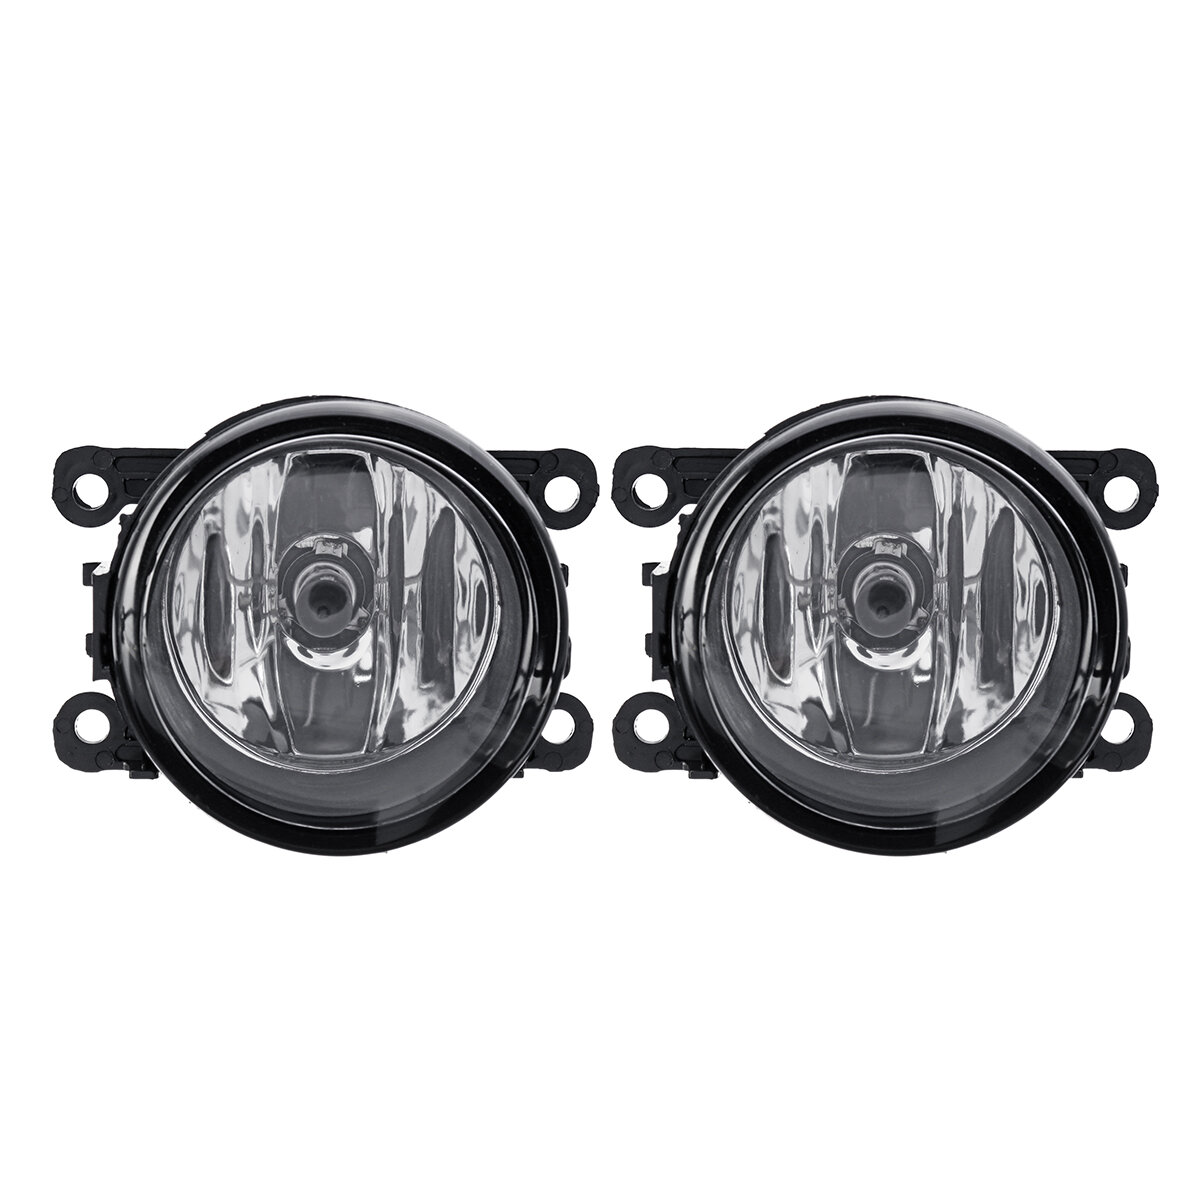 Car Front Bumper Fog Lights with H11 Lamps Harness Pair for Mitsubishi Outlander Sport/RVR/ASX